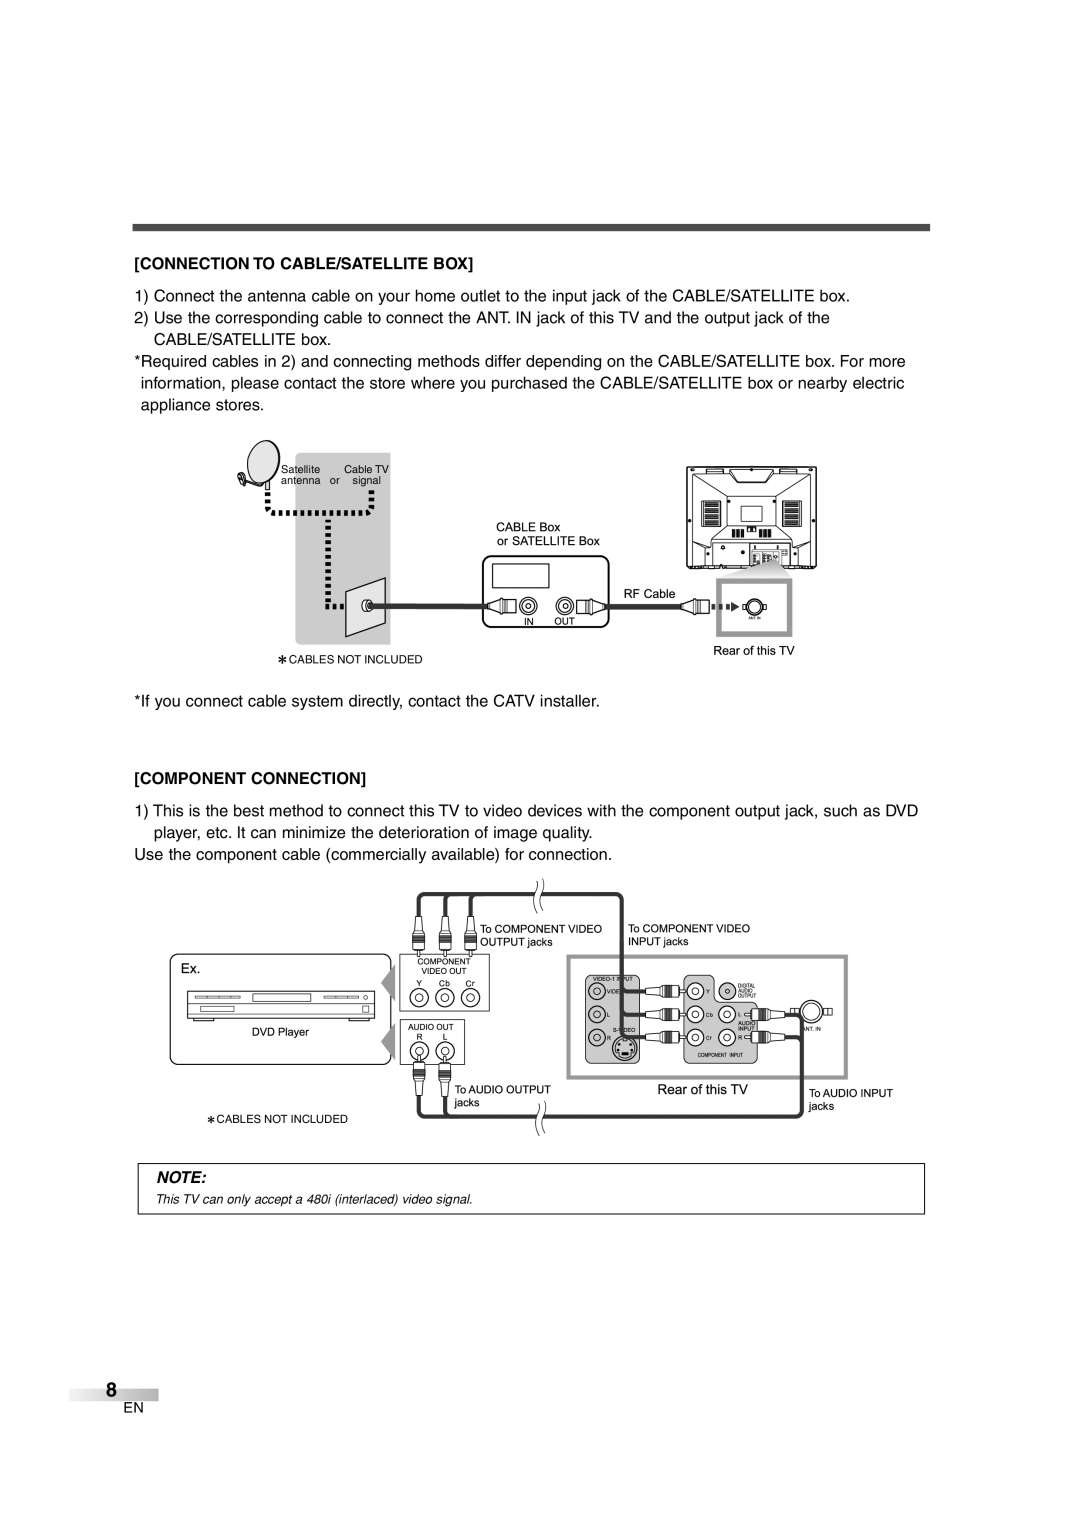 Sylvania SSGF4276 owner manual Connection To Cable/Satellite Box, Component Connection 